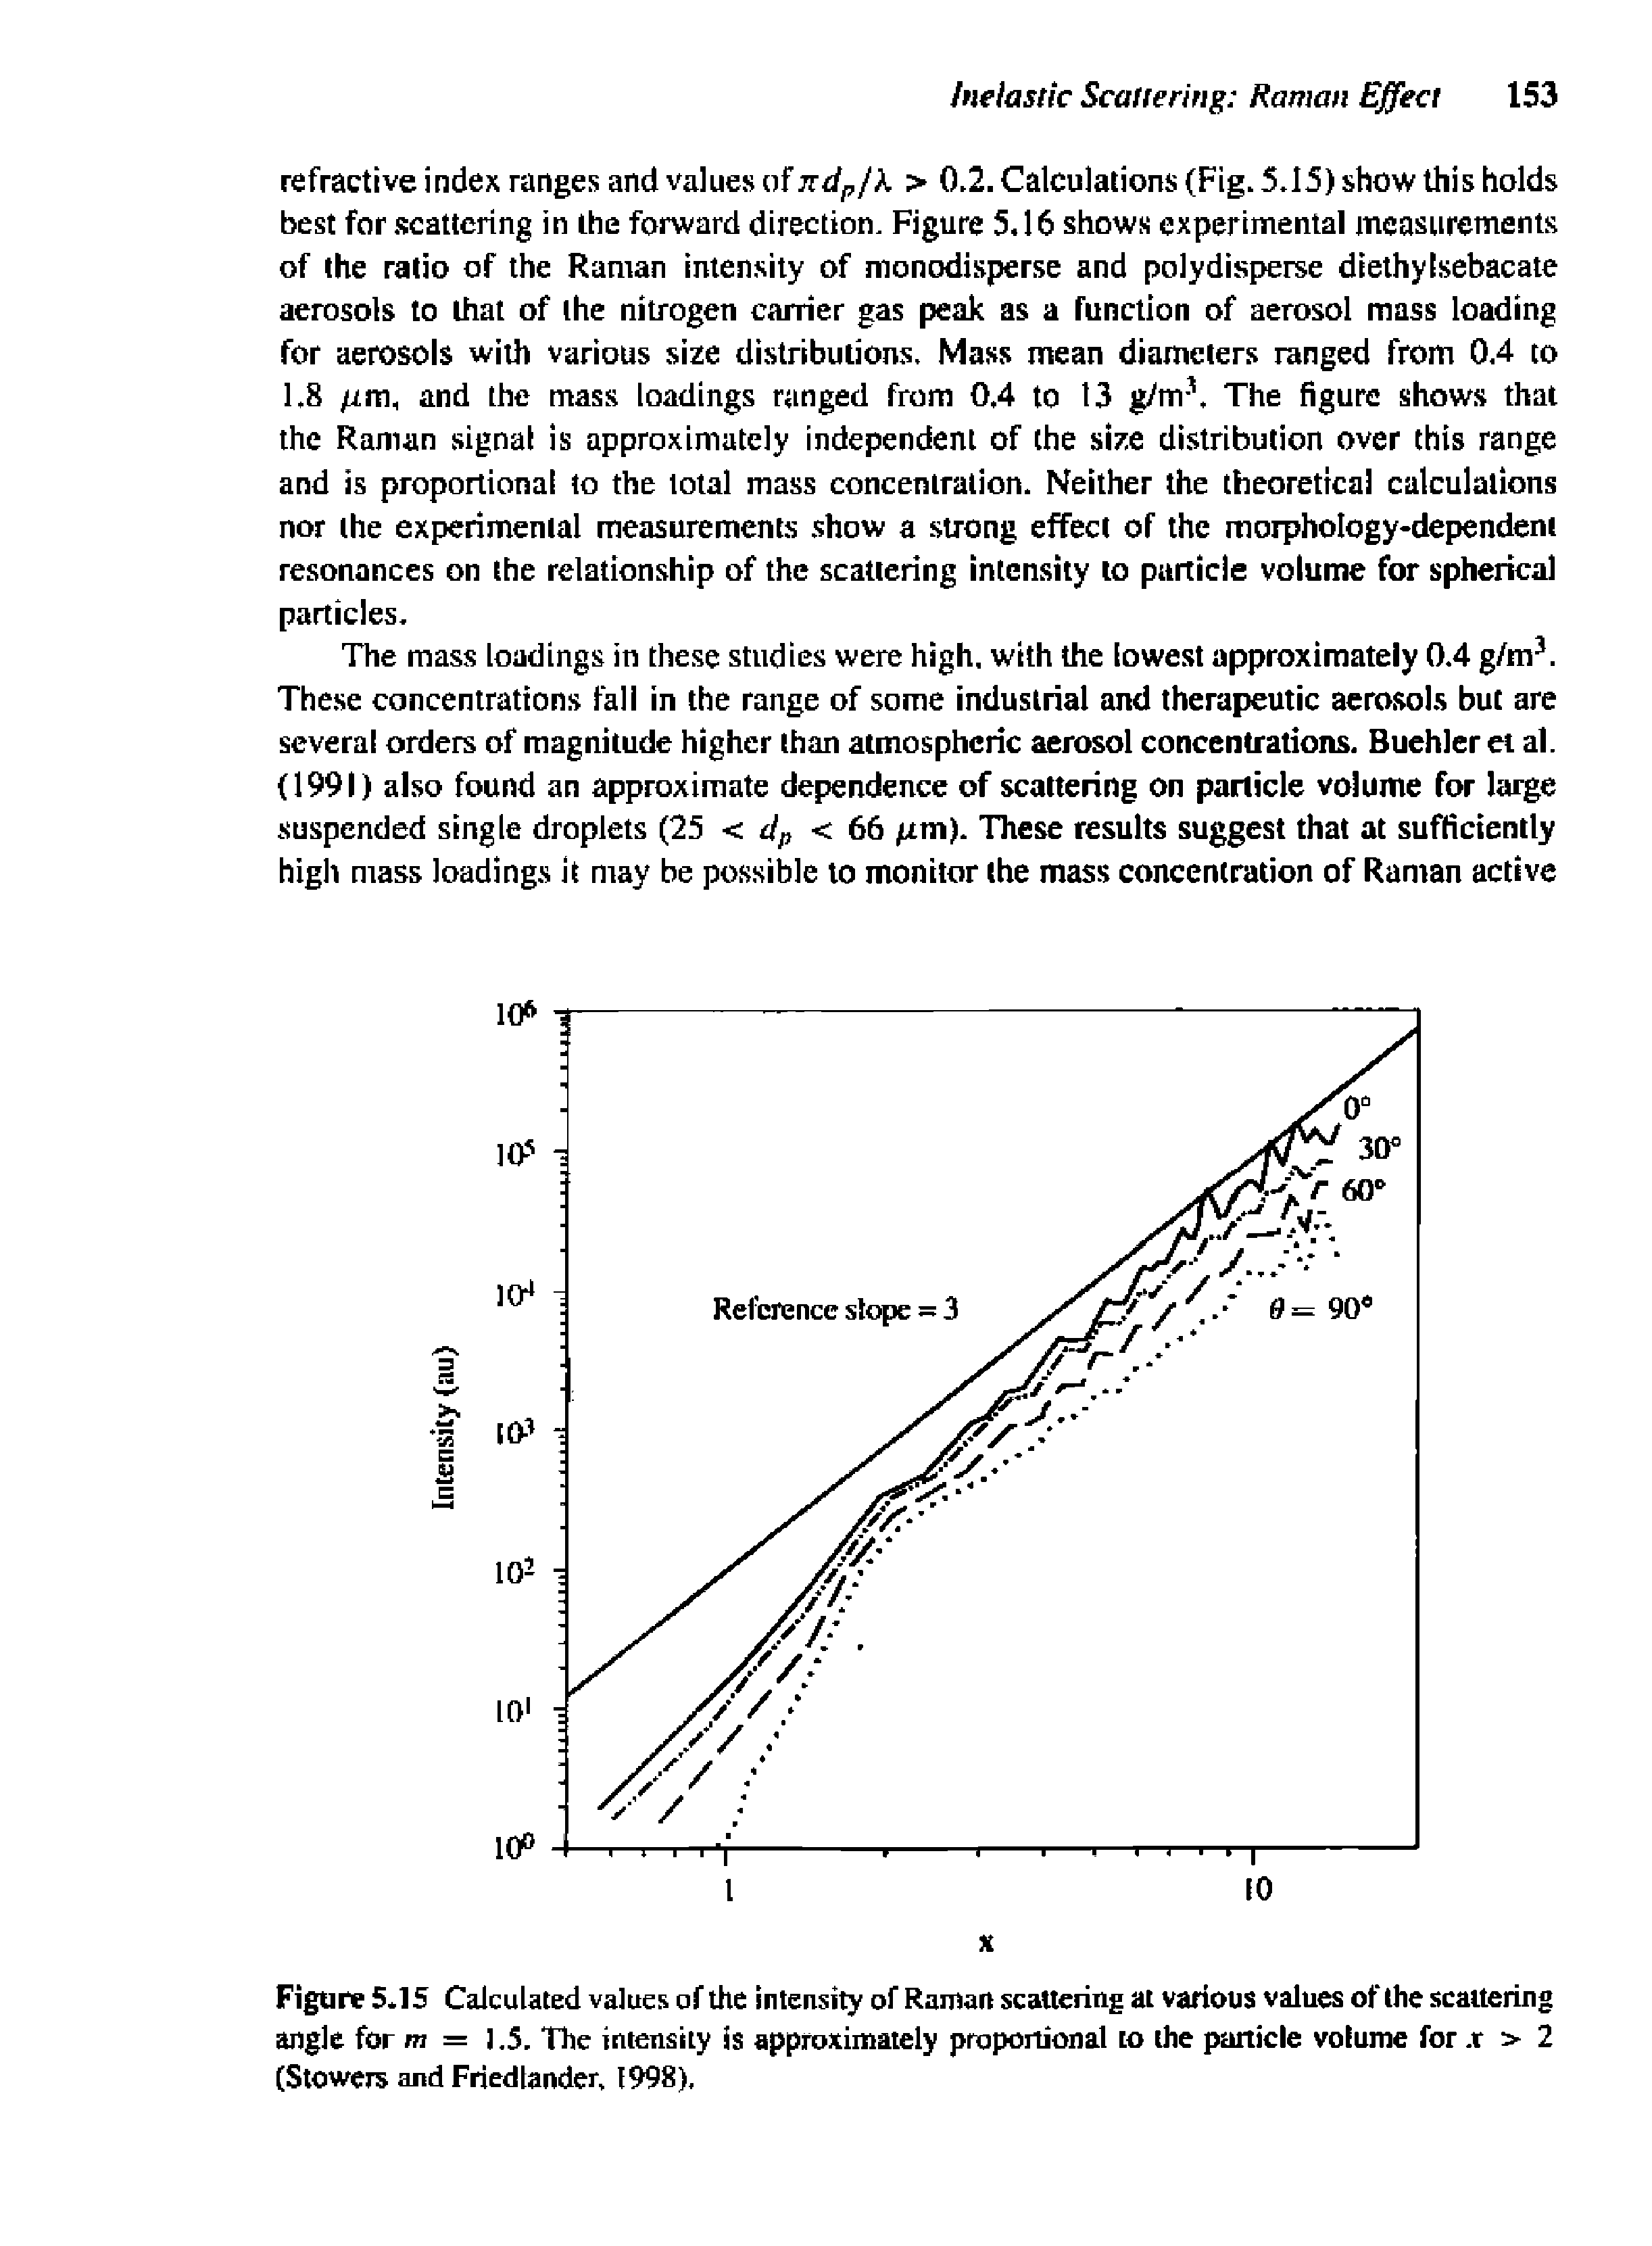 Figure 5 15 Calculated values of the intensity of Raman scattering at various values of the scattering angle for m = ]. 5. The intensity is approximately proponional to the particle volume for. r > 2 (Stowers and Friedlander, 1998),...